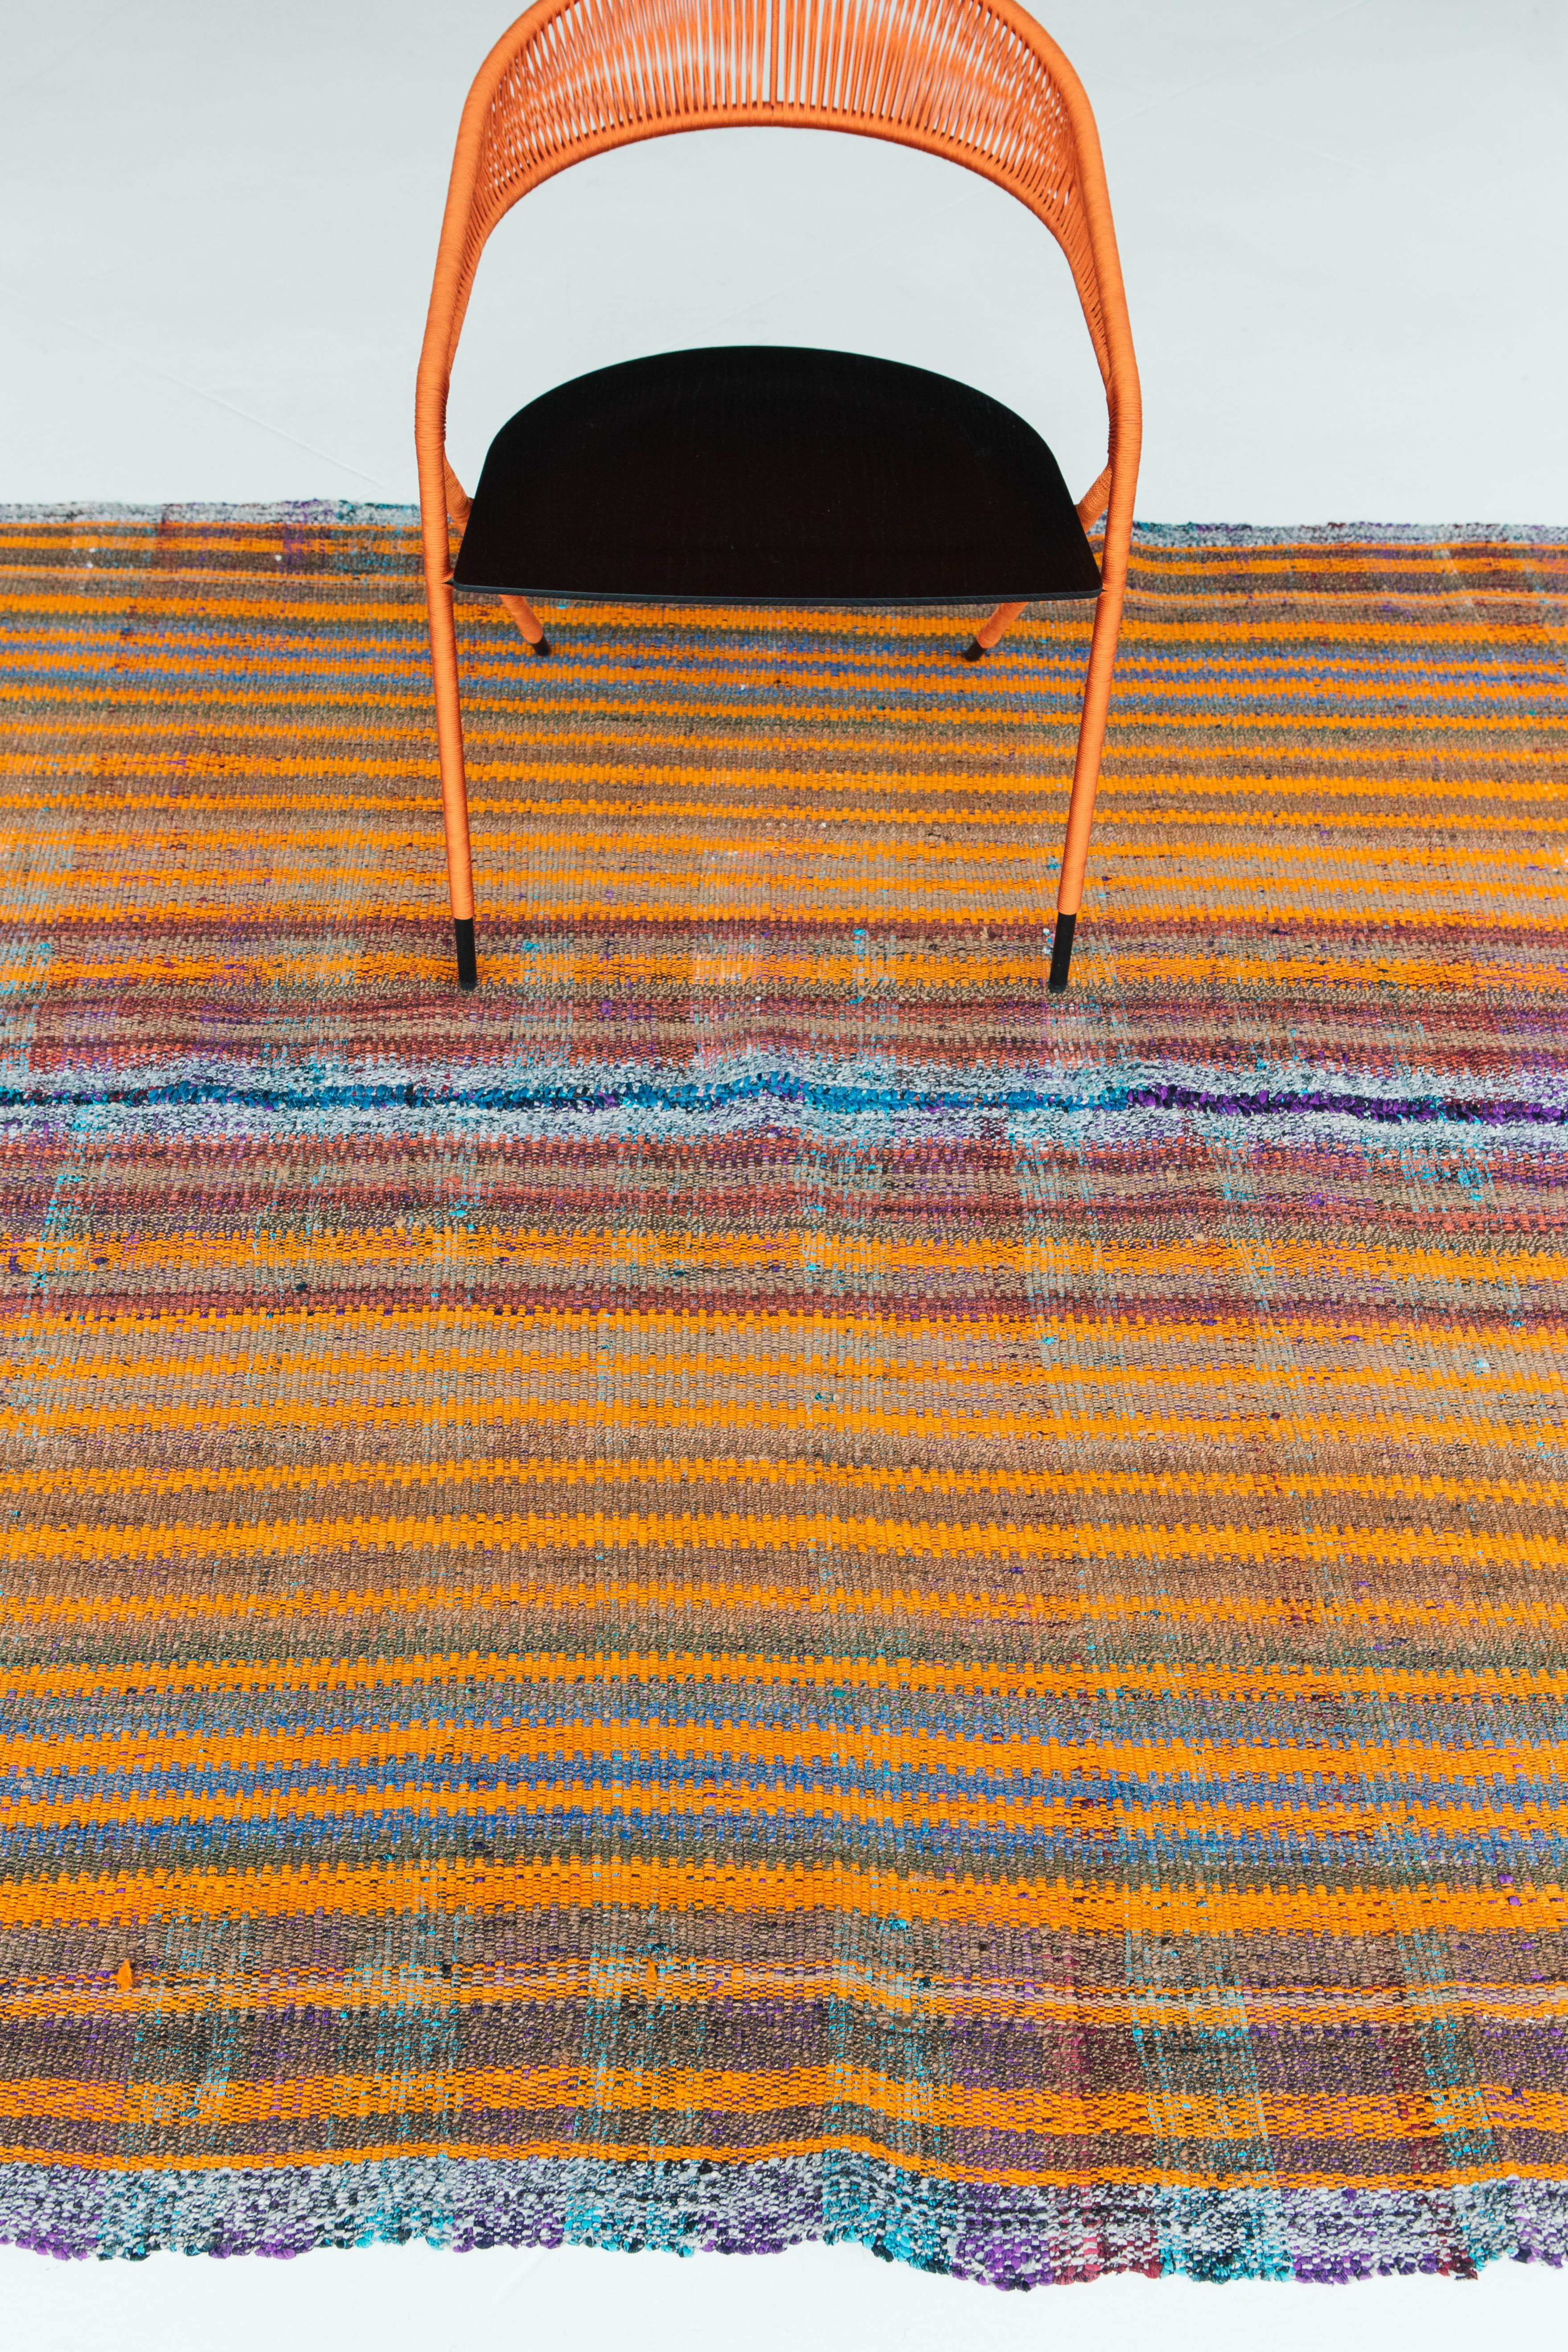 This Turkish Tisse Kilim weaves together beautiful colors to create an organic stripe pattern. Bright orange, purples and hues of red are just some of the many colors that create a cohesive look in an interesting texture. This flat-weave would be a